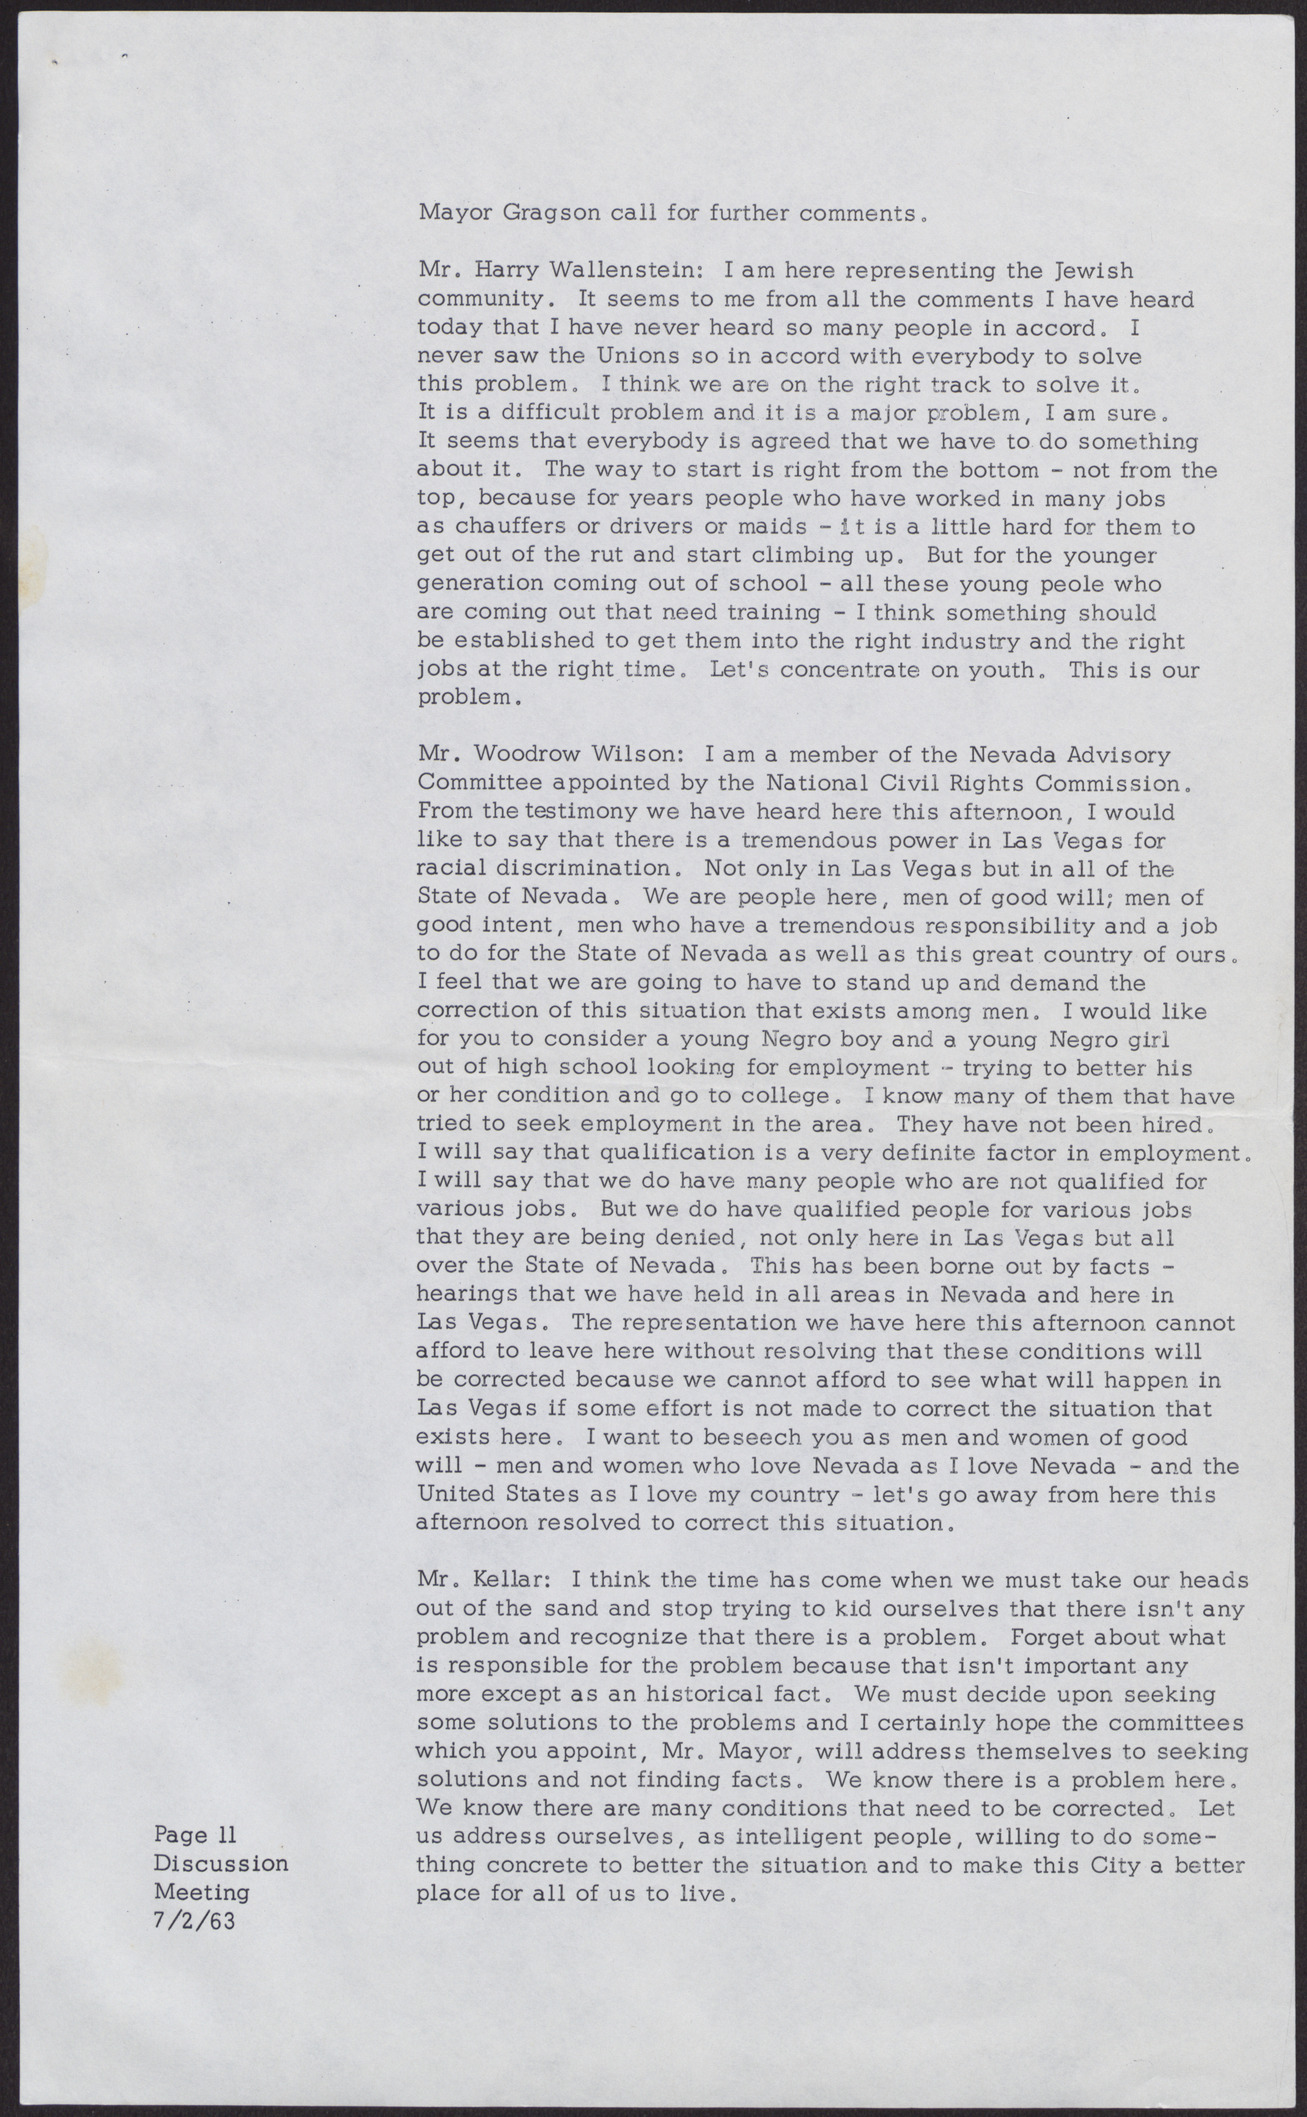 Minutes from a meeting with Board of Commissioners for the City of Las Vegas (13 pages), July 2, 1963, page 11